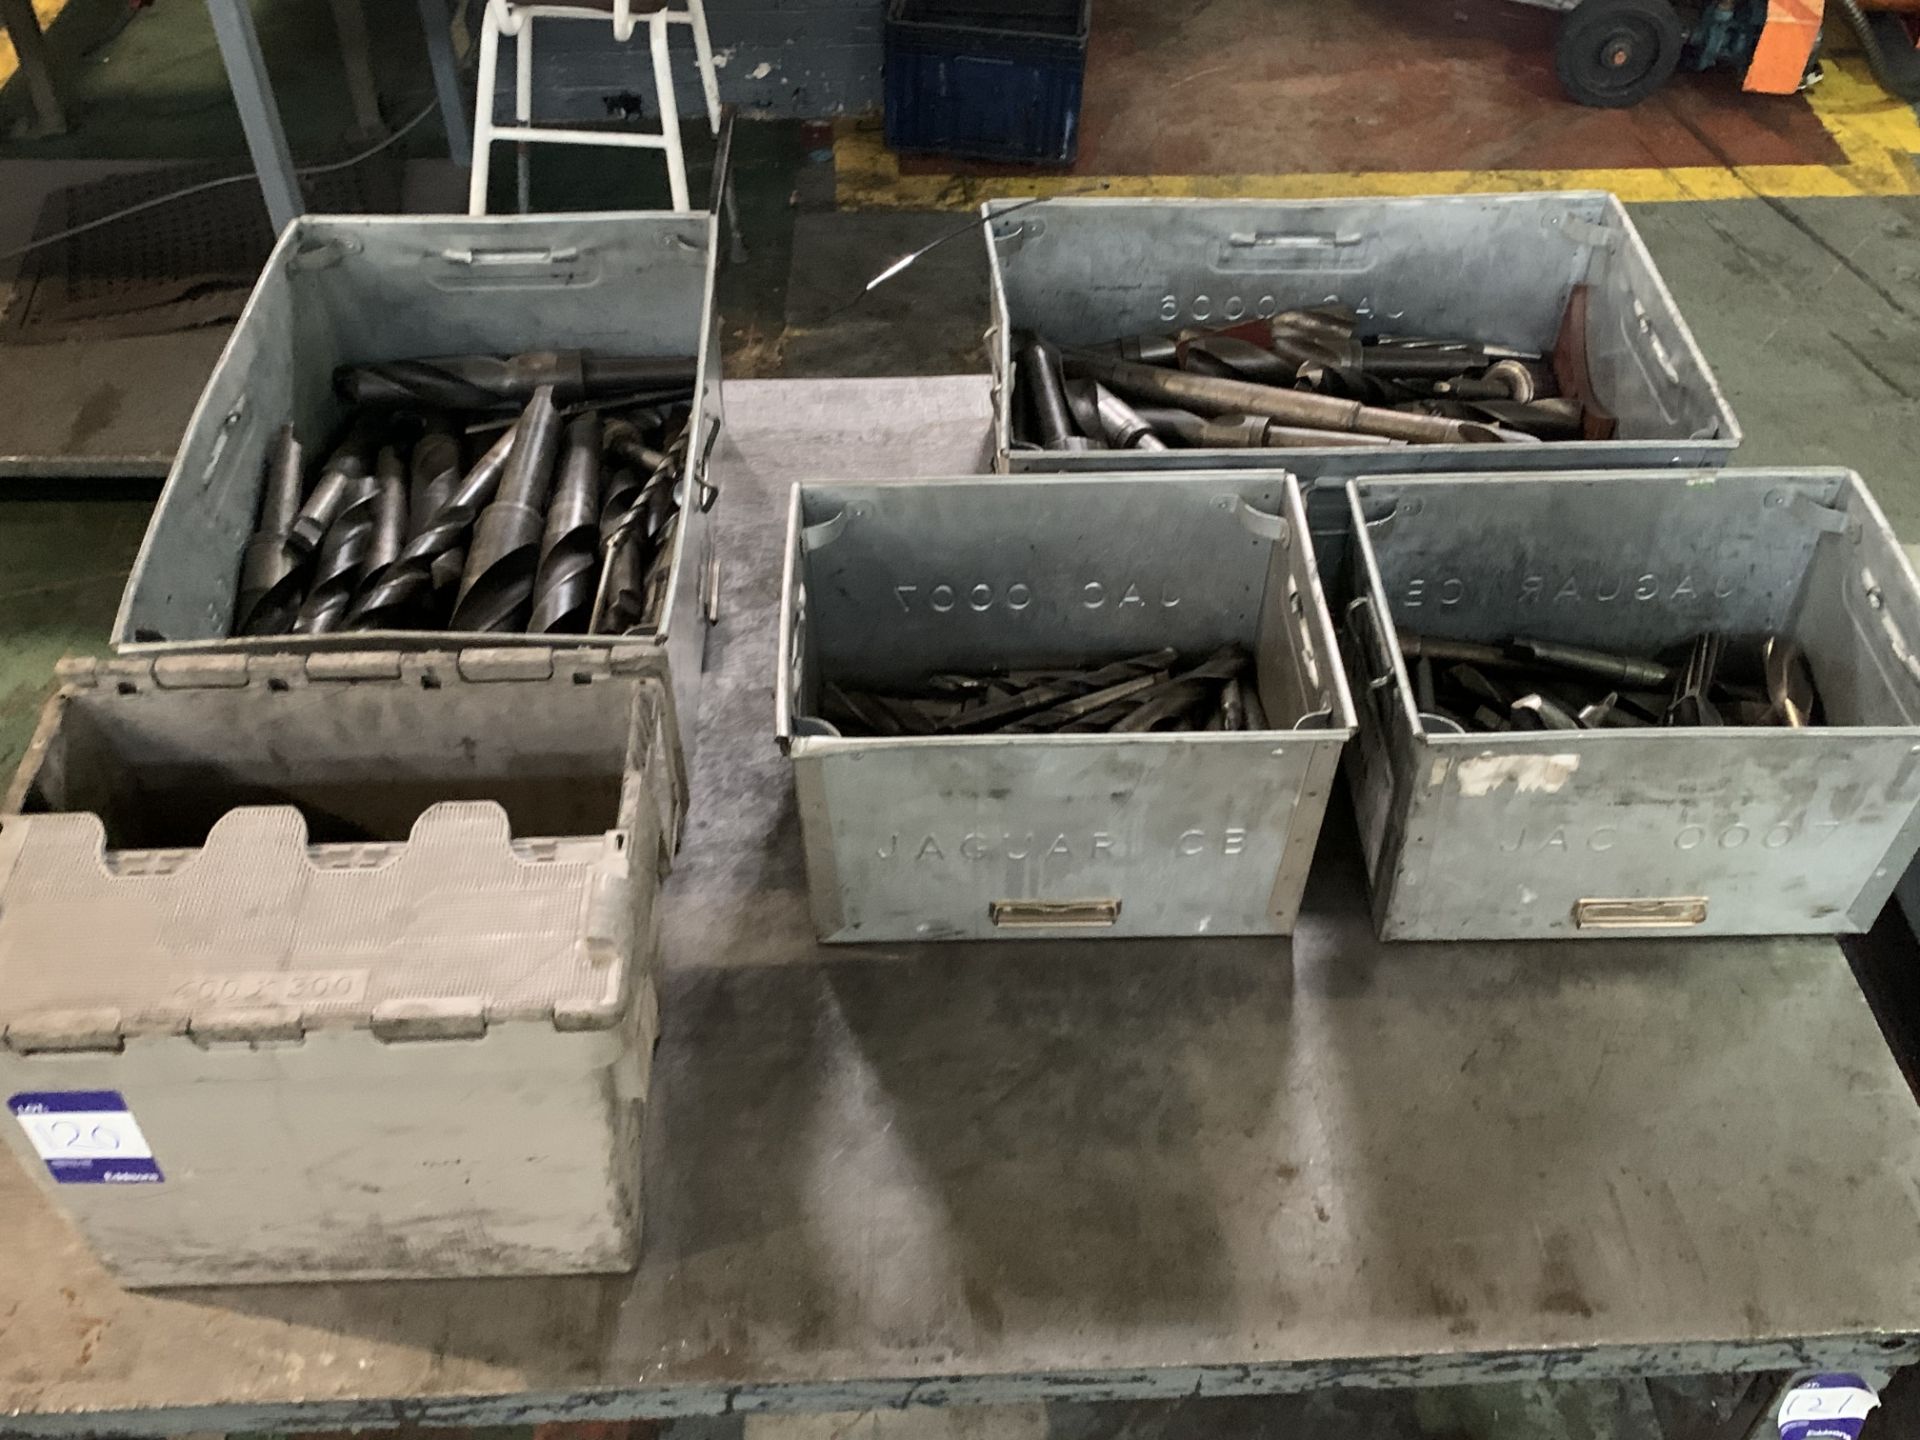 Quantity of Various Sized Drills in 5x Bins.